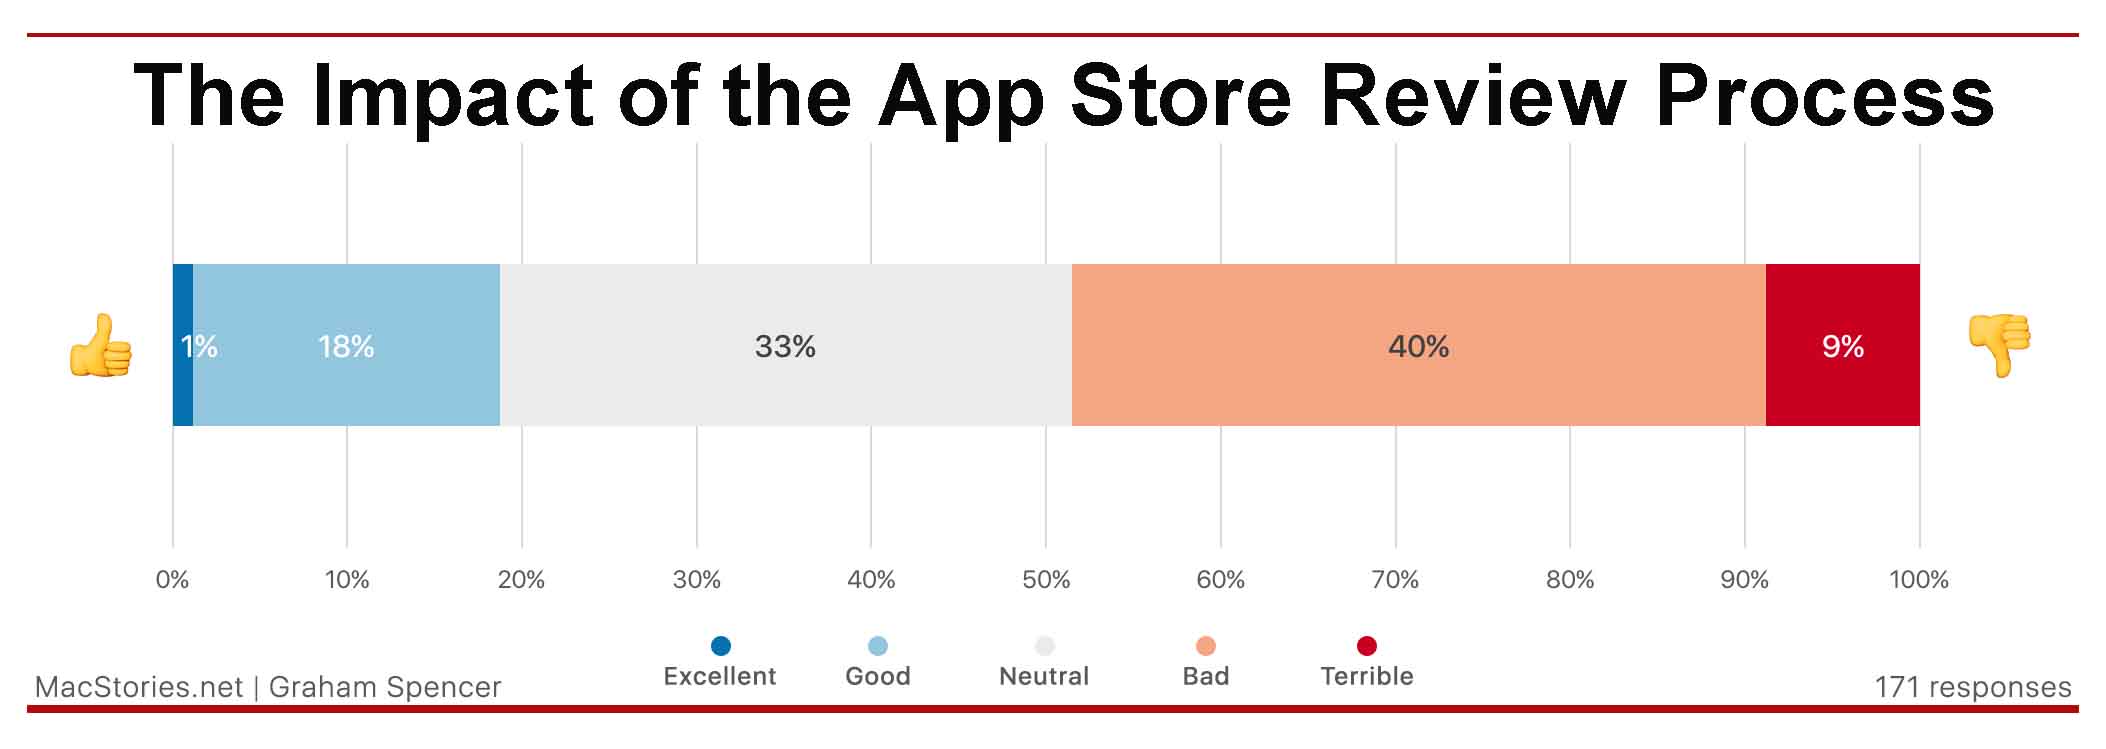 The Impact of the App Store Review Process